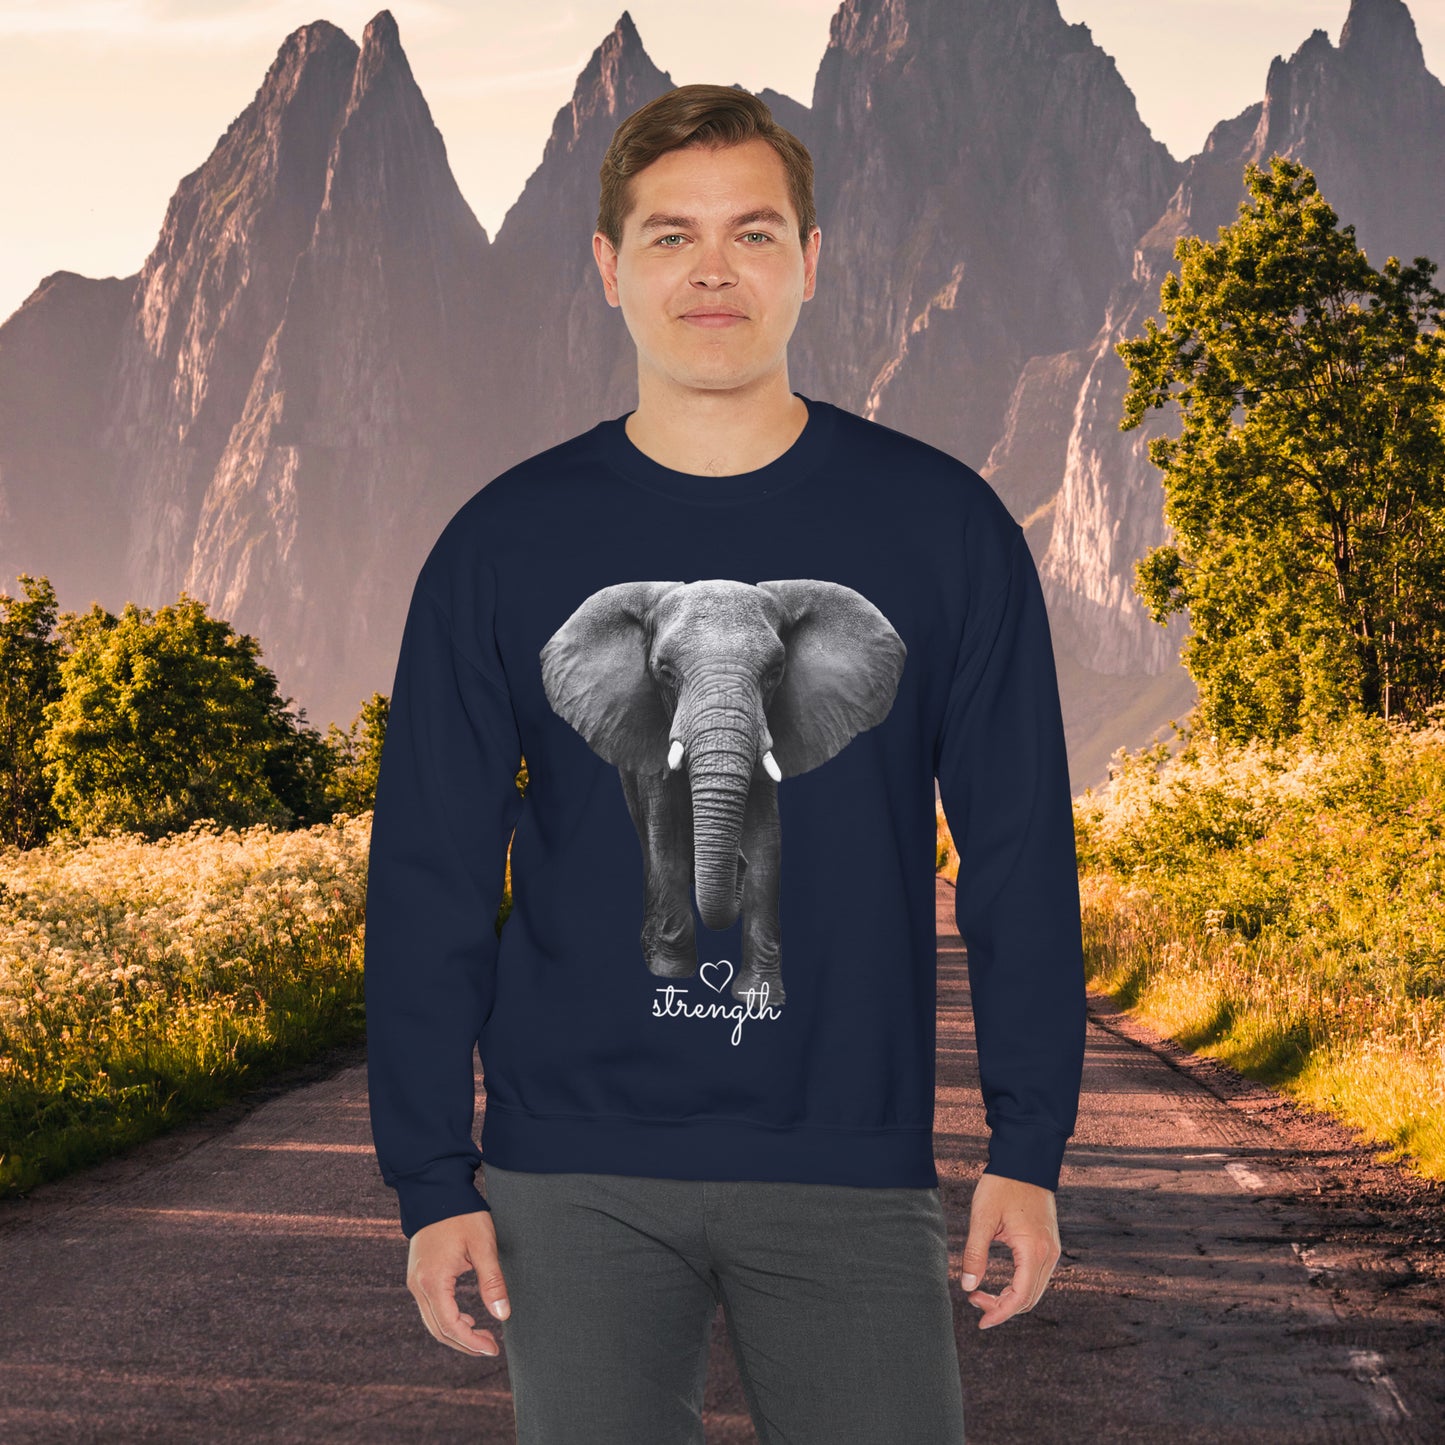 Elephant lover? Then this is the Sweatshirt for you. Give the gift of this Unisex Heavy Blend™ Crewneck Sweatshirt or get one for yourself.